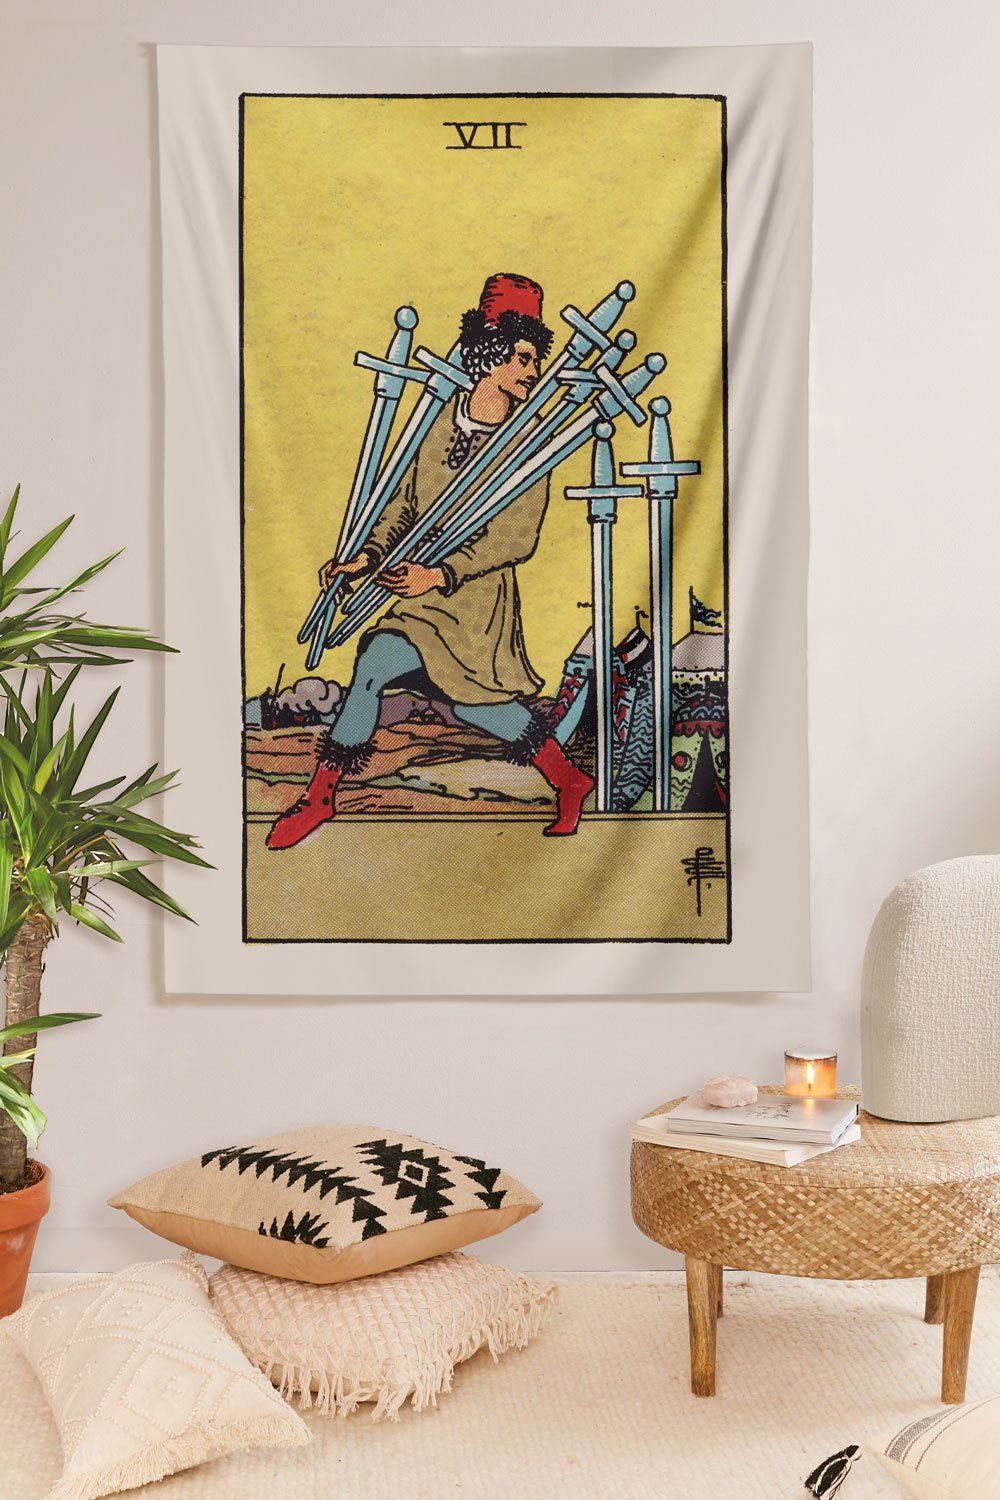 7 of Swords Tapestry tapestry NirvanaThreads 